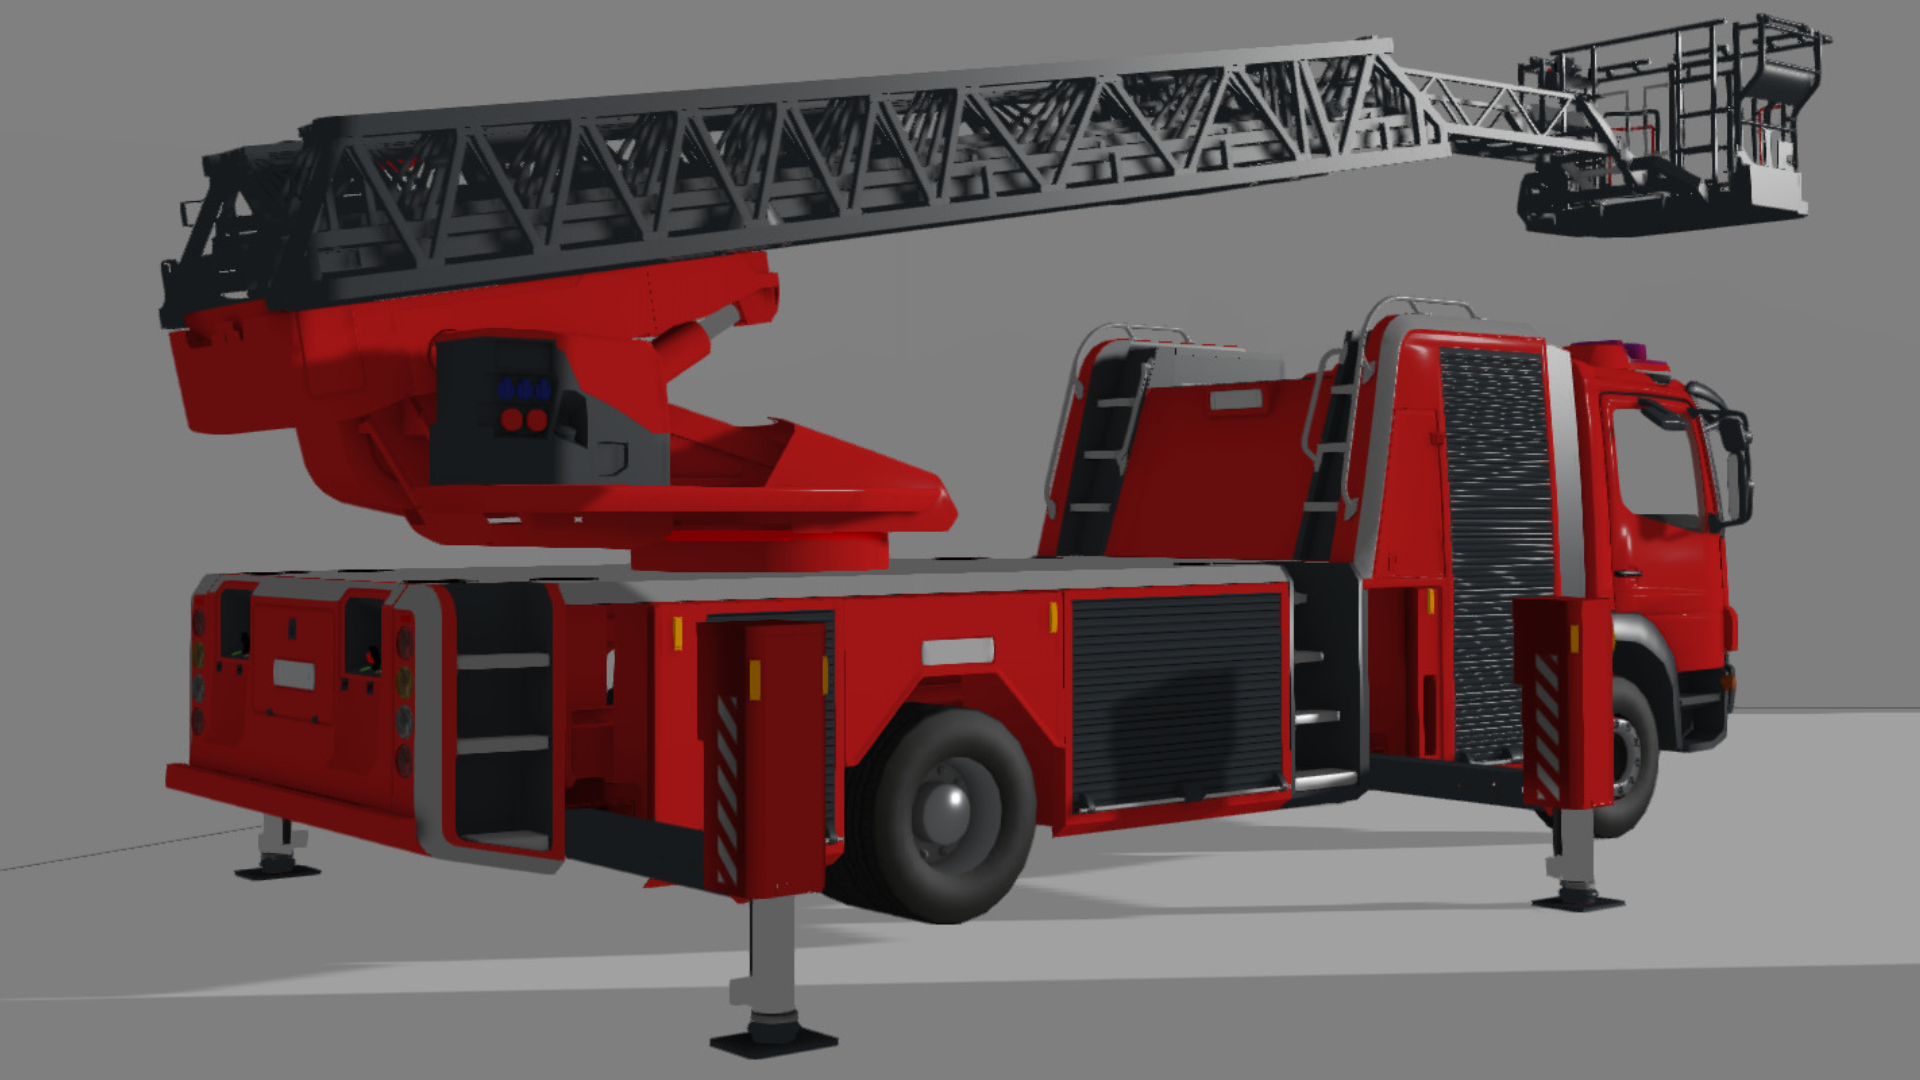 The High-quality 3D model of the Rosenbauer-XS Aerial Ladder used in our virtual reality training simulator. 